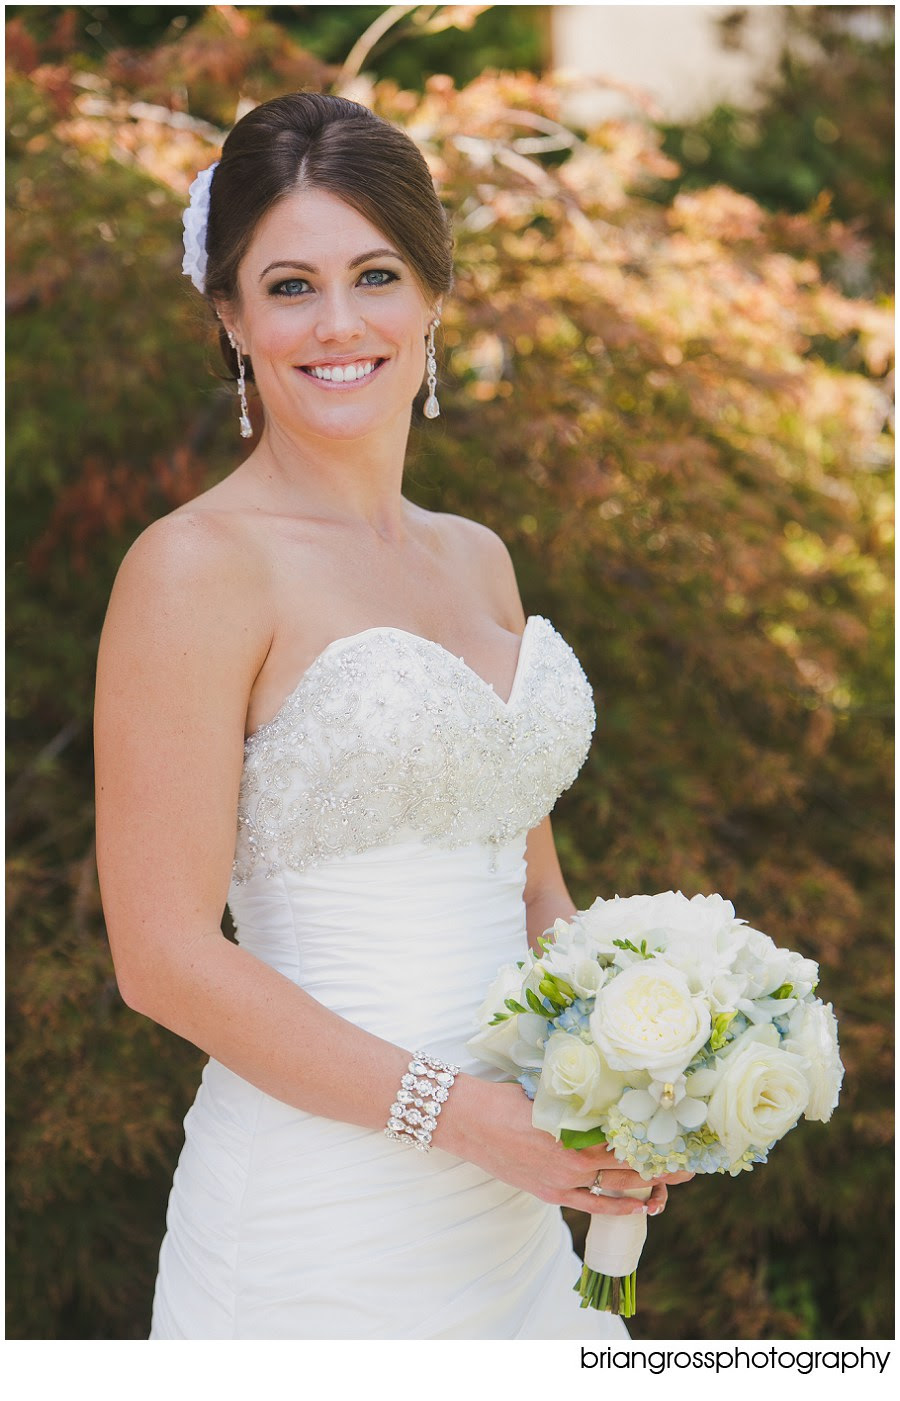 Brian Gross Photography: Tammi & Brian: Married! - A Crooked Vine ...